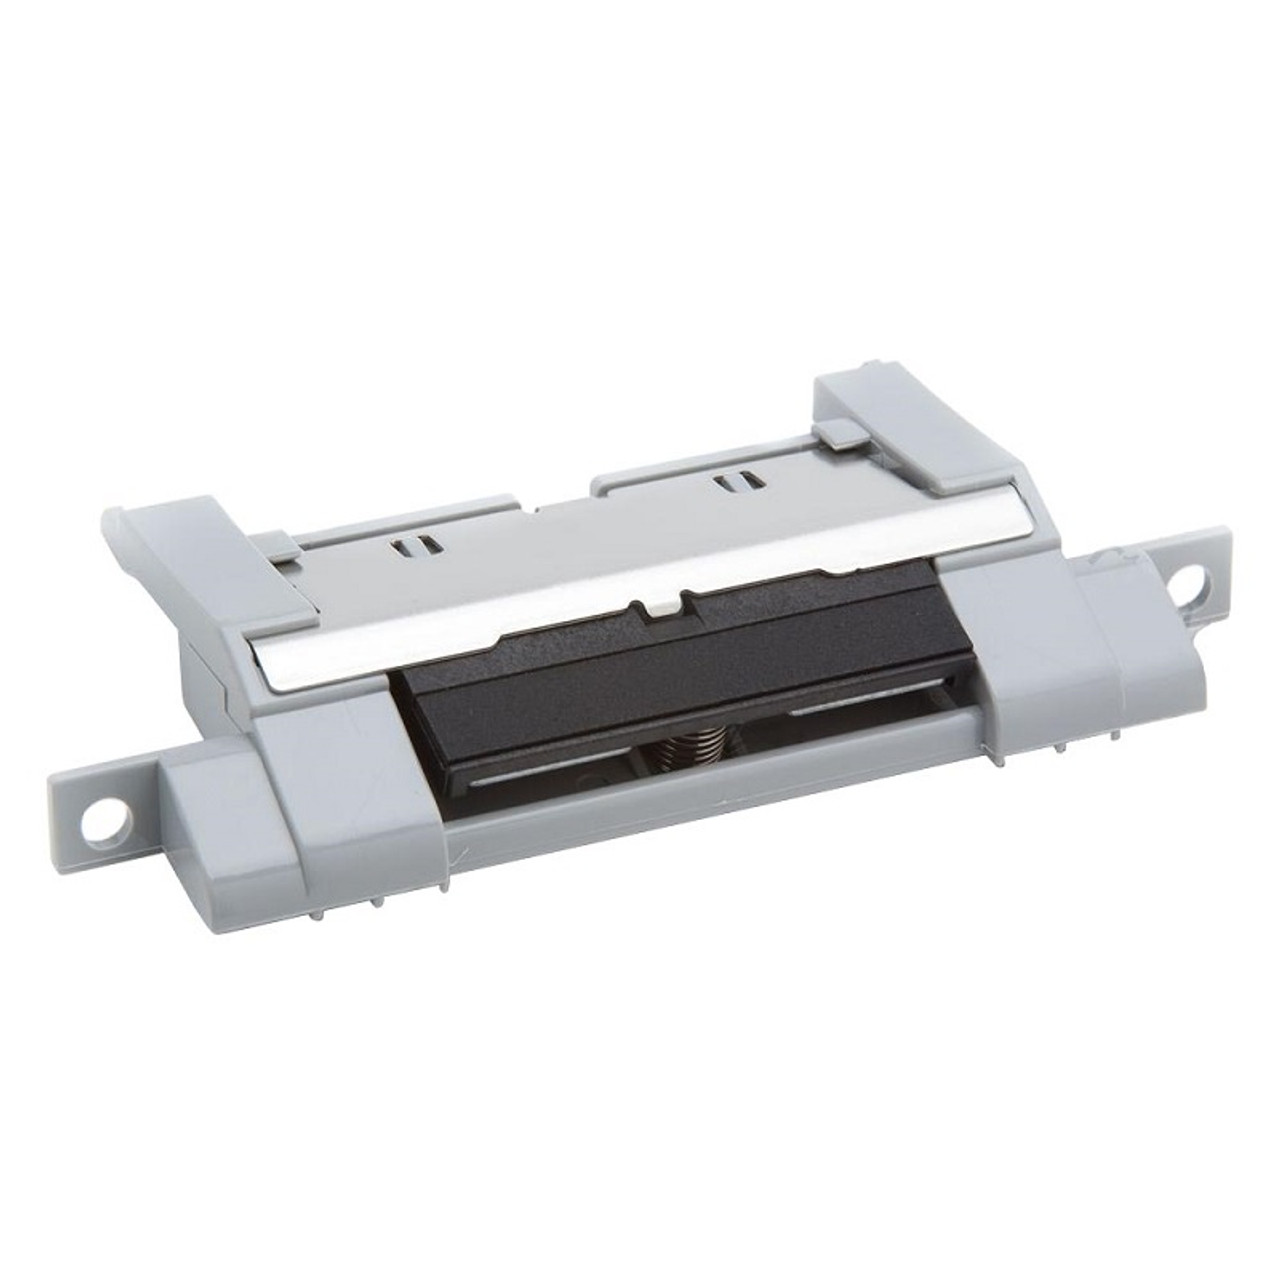 RM1-0739-000CN - HP Separation Pad Tray 2 for LaserJet 3500 / 3550 / 3700 Series